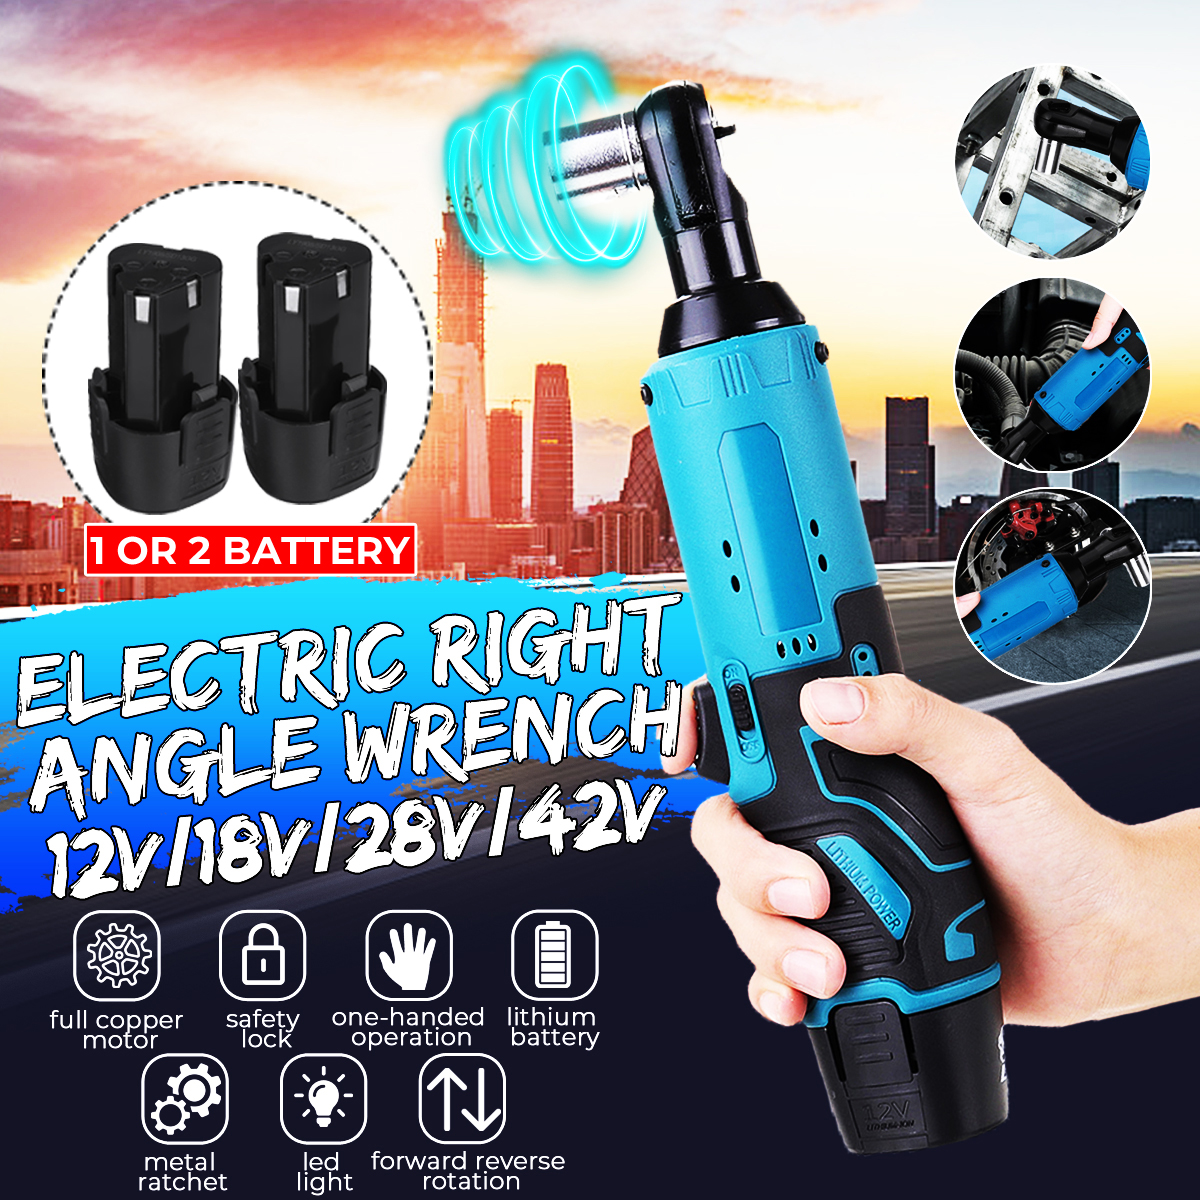 12V-Right-Angle-Wrench-LED-1500mAh-Rechargeable-Ratchet-Wrench-Car-Repair-Tool-W-12pcs-Battery-1765715-1